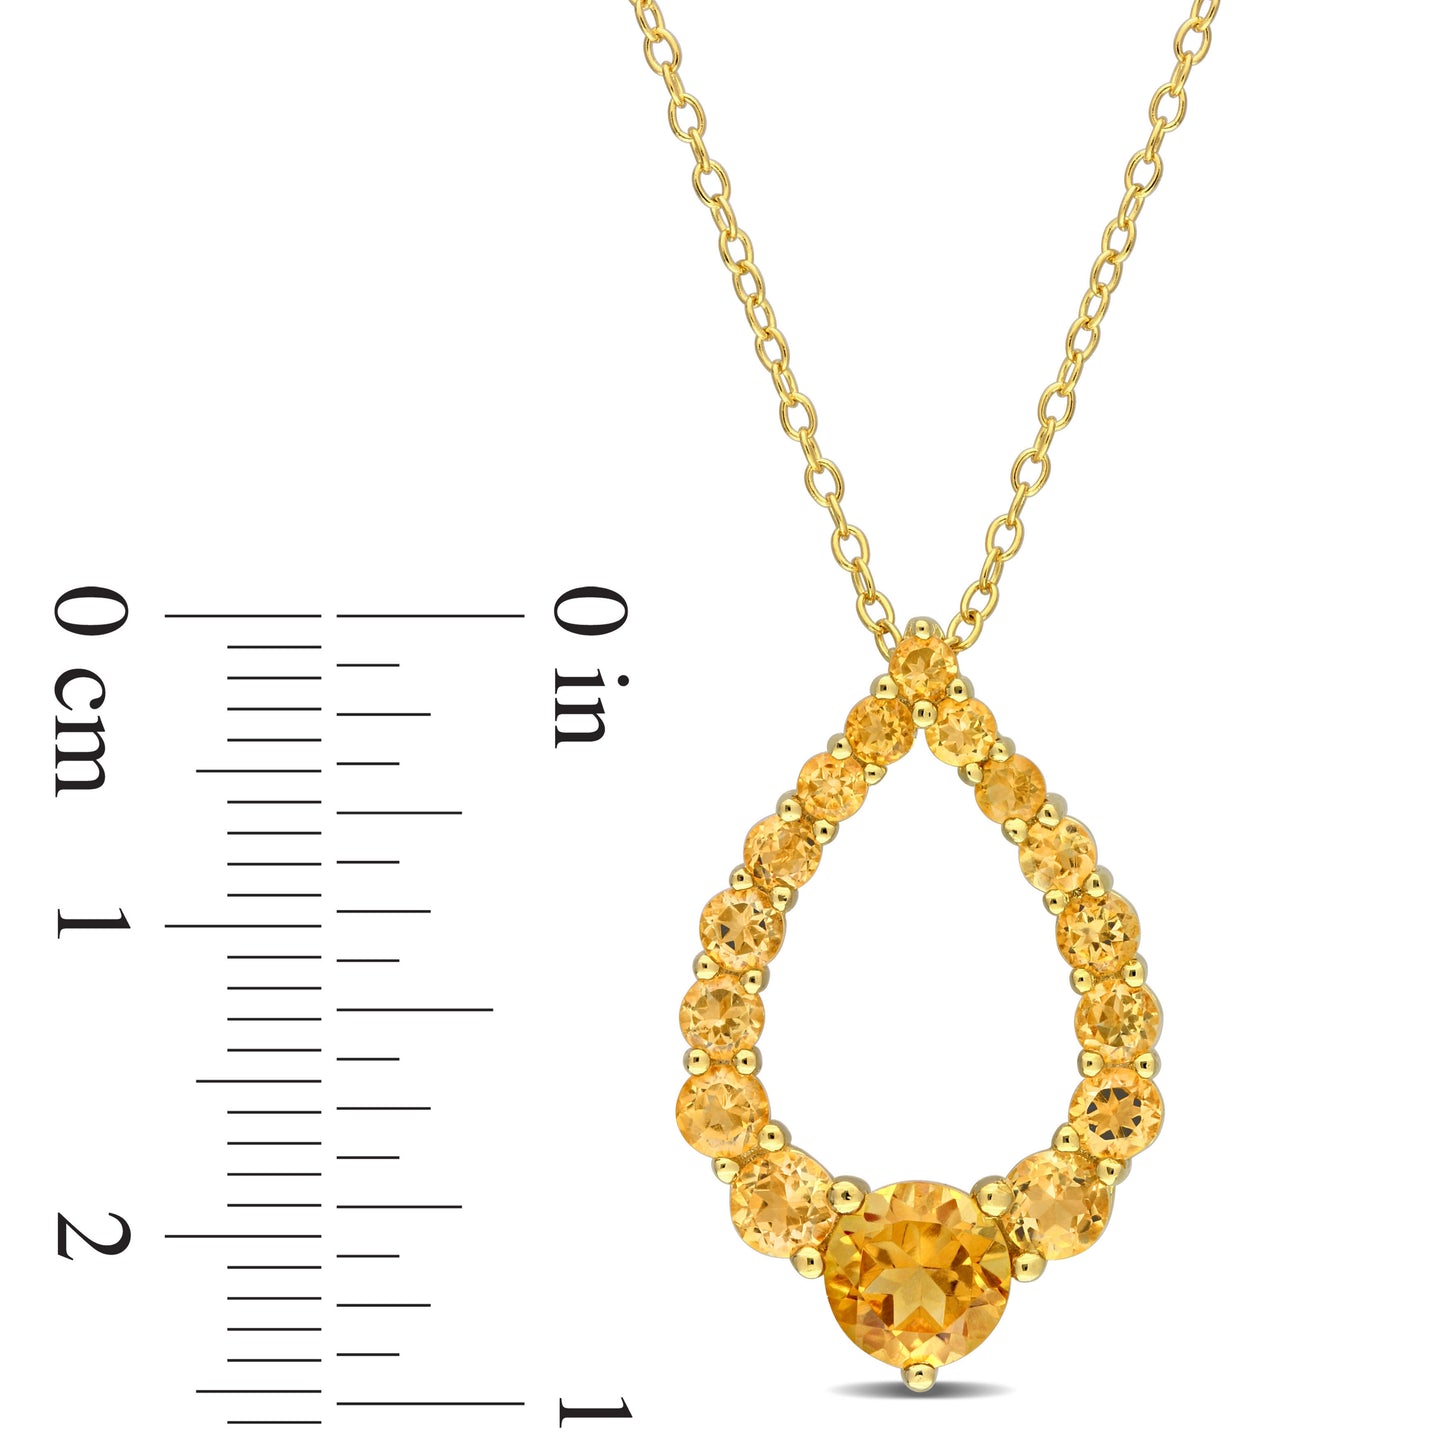 2ct Madeira Citrine Teardrop Necklace in Yellow Silver